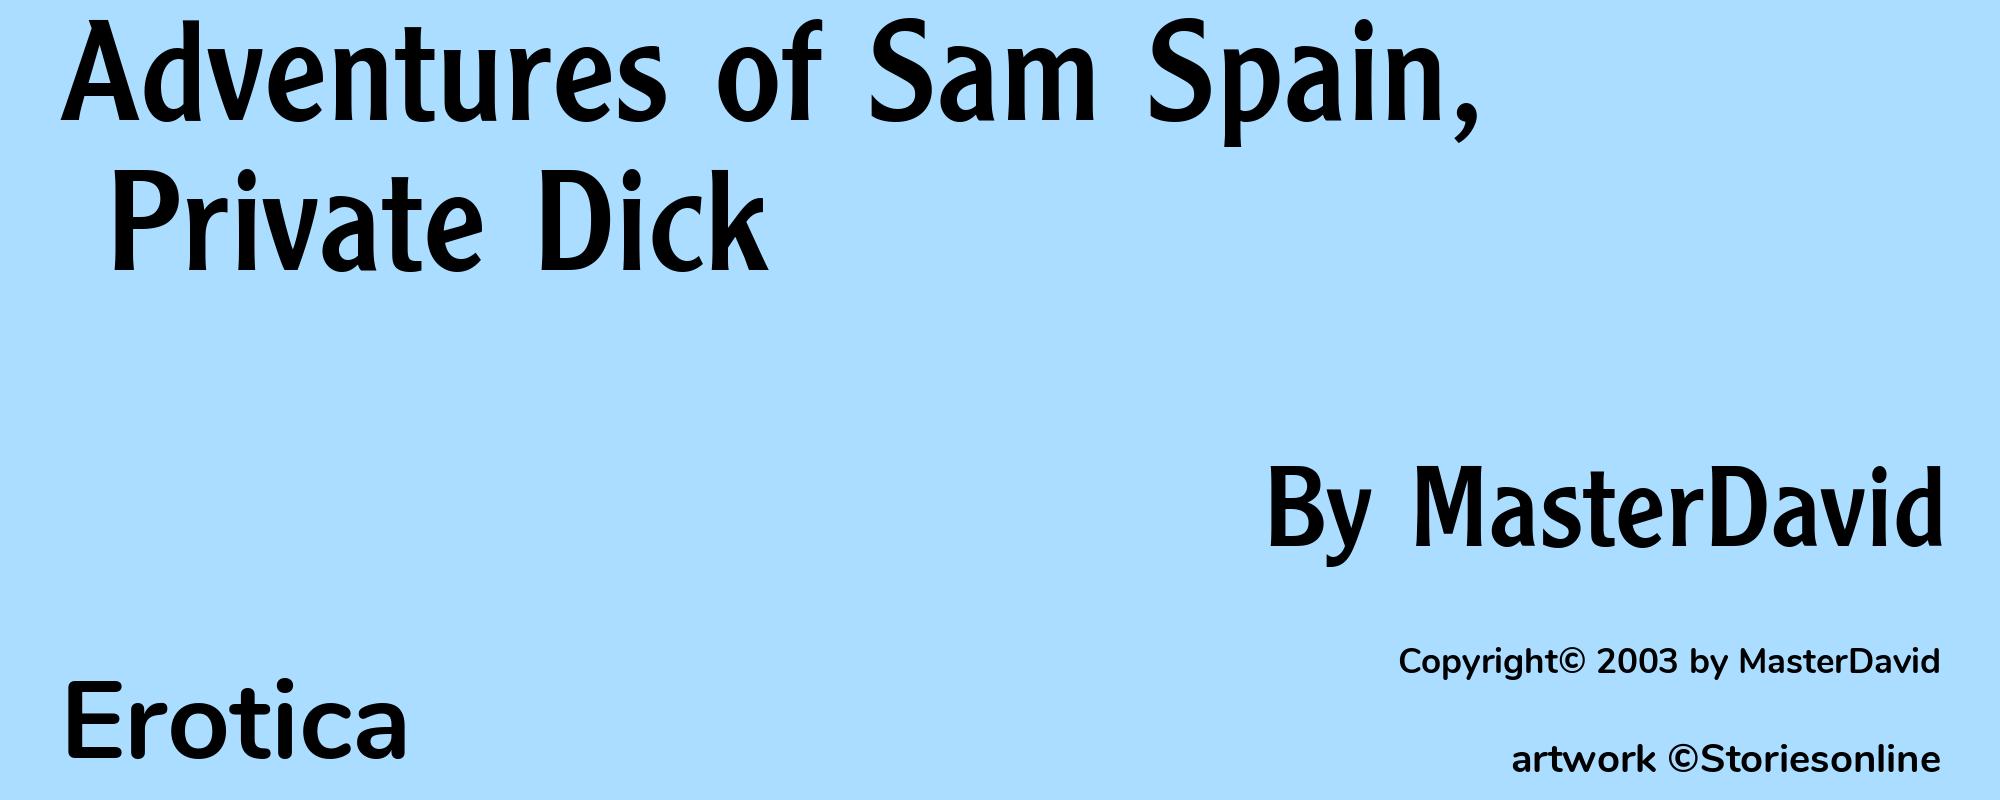 Adventures of Sam Spain, Private Dick - Cover